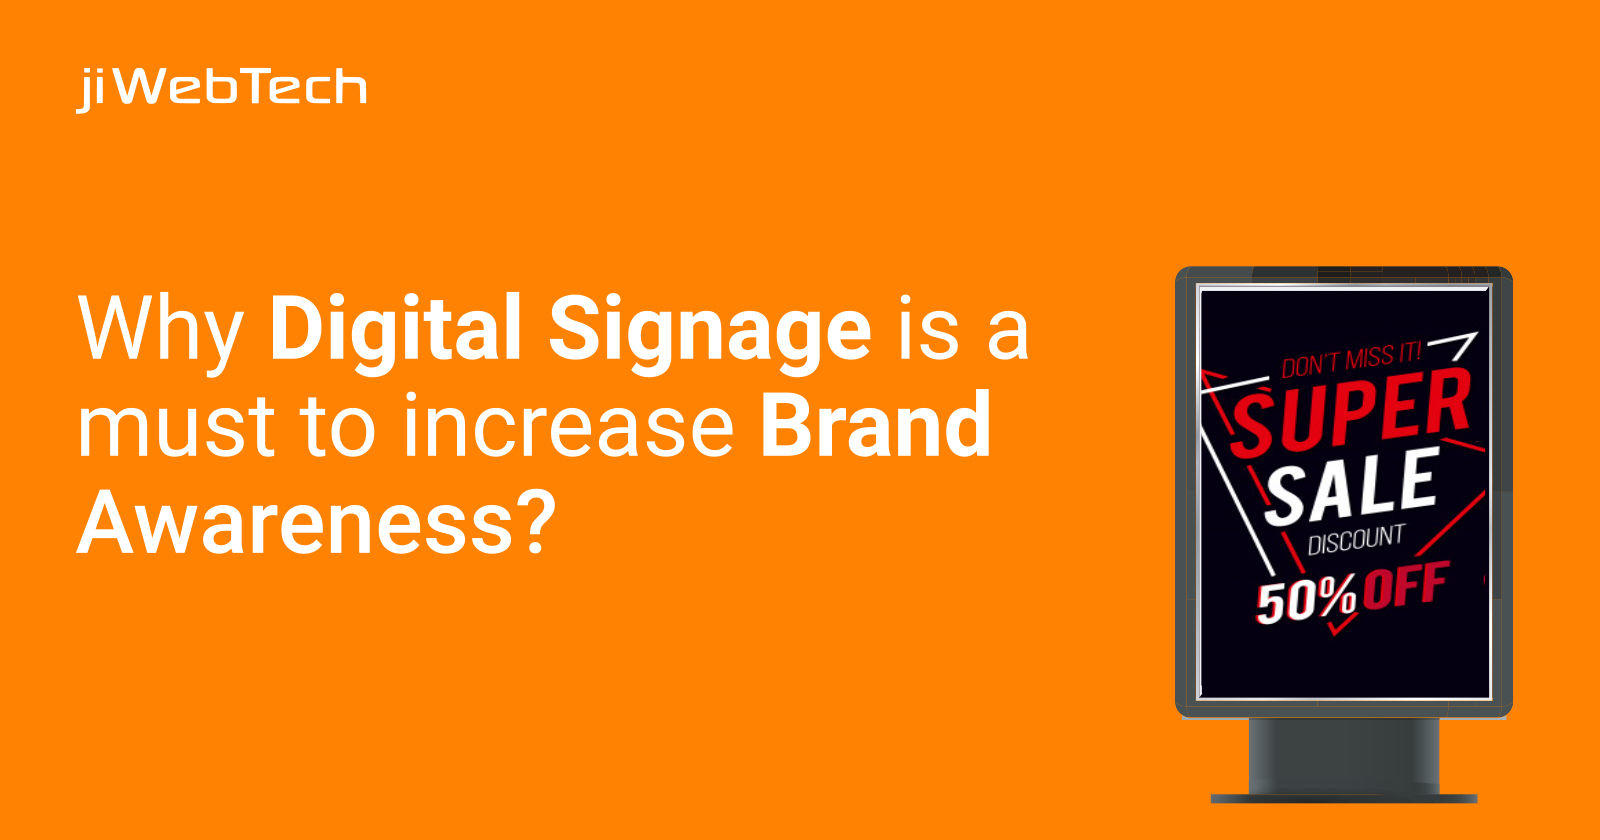 Why Digital Signage is a must to increase Brand Awareness?